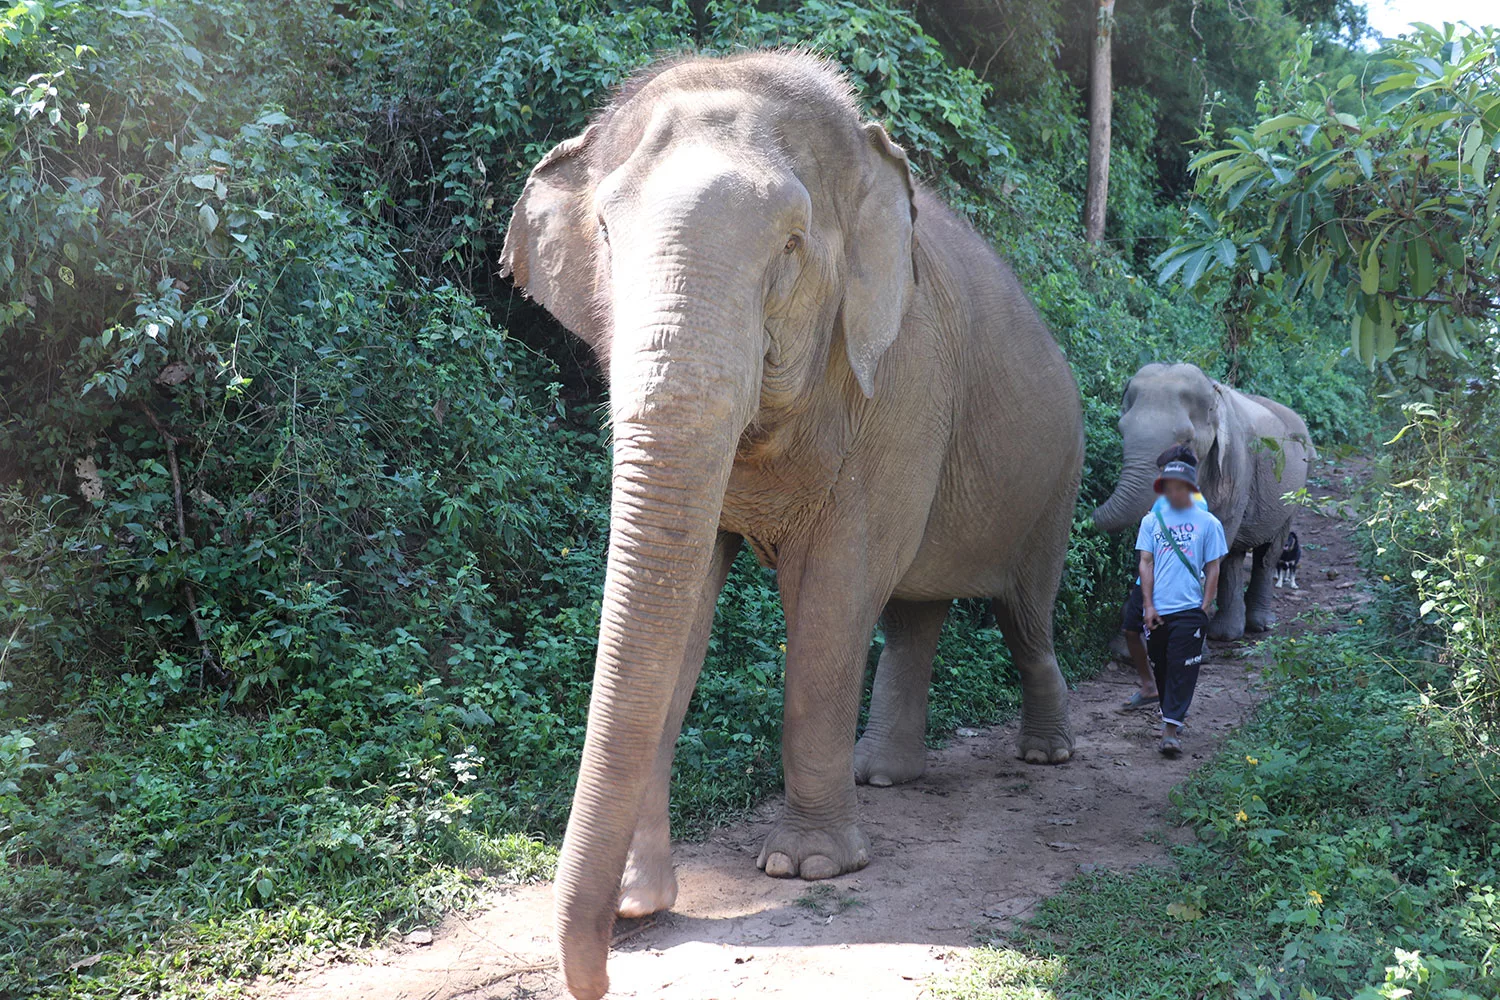 Care for Elephants at Elephant Nature Park